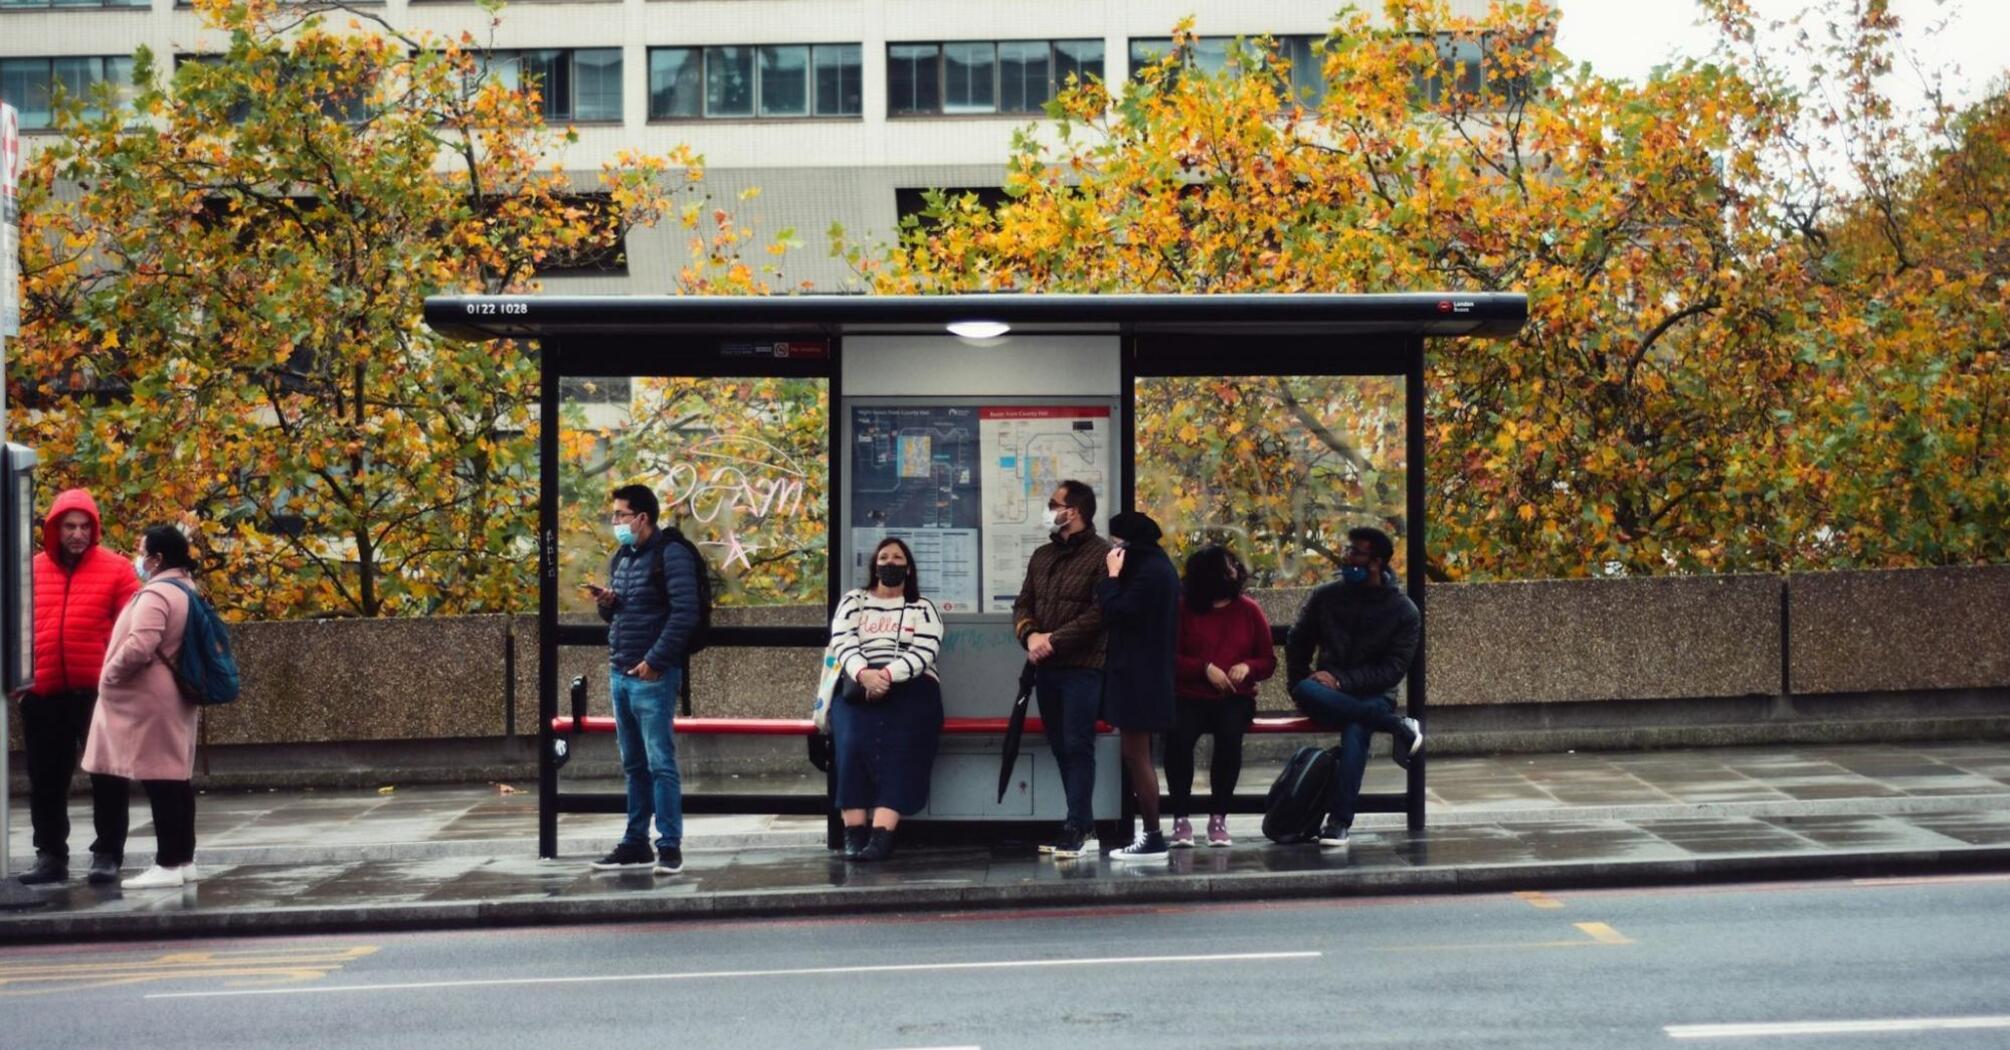 People waiting at a bus stop